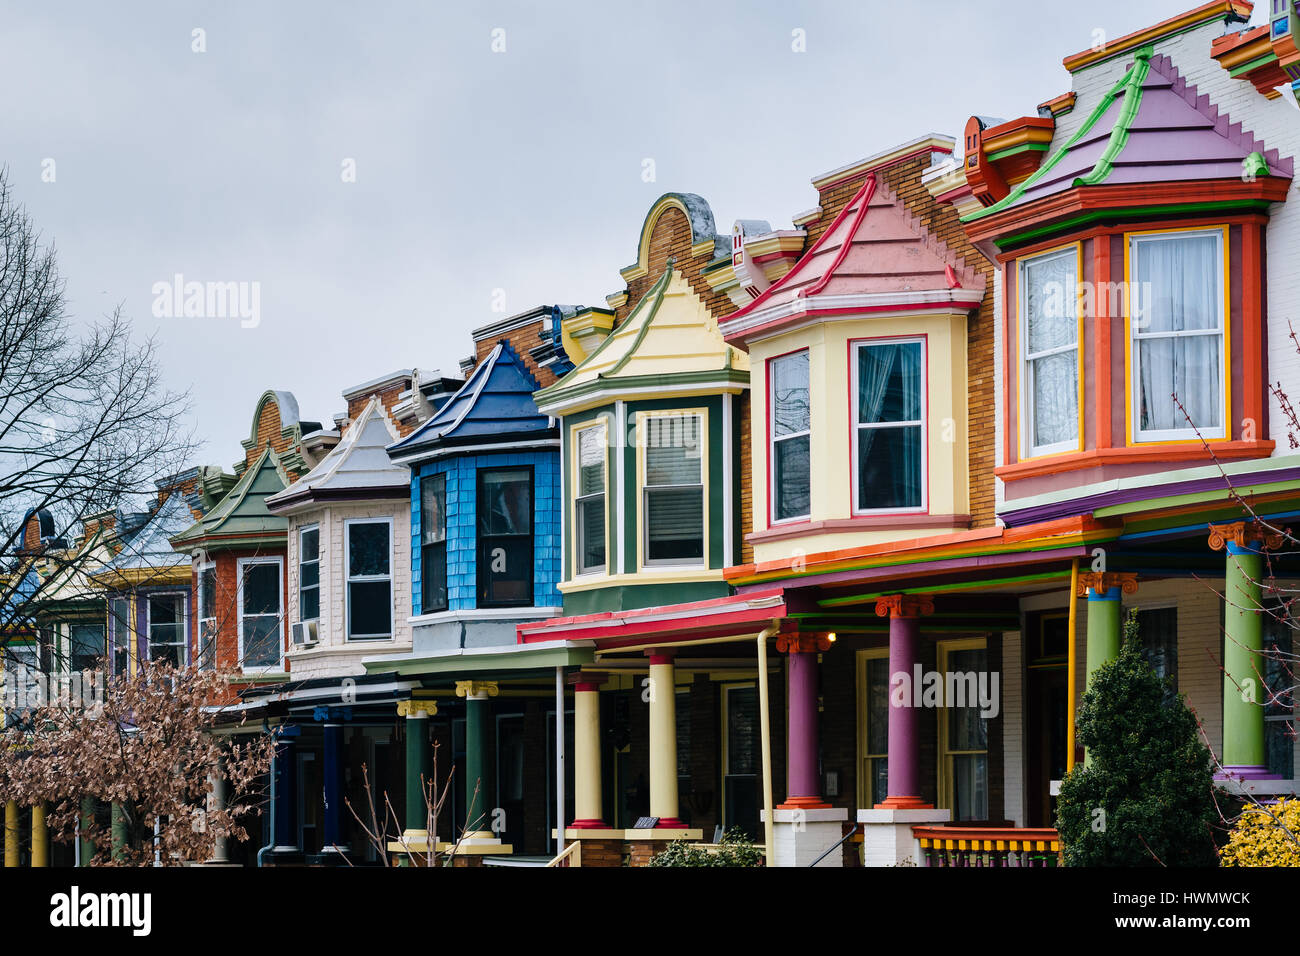 The colorful Painted Ladies row houses, on Guilford Avenue, in Charles Village, Baltimore, Maryland. Stock Photo